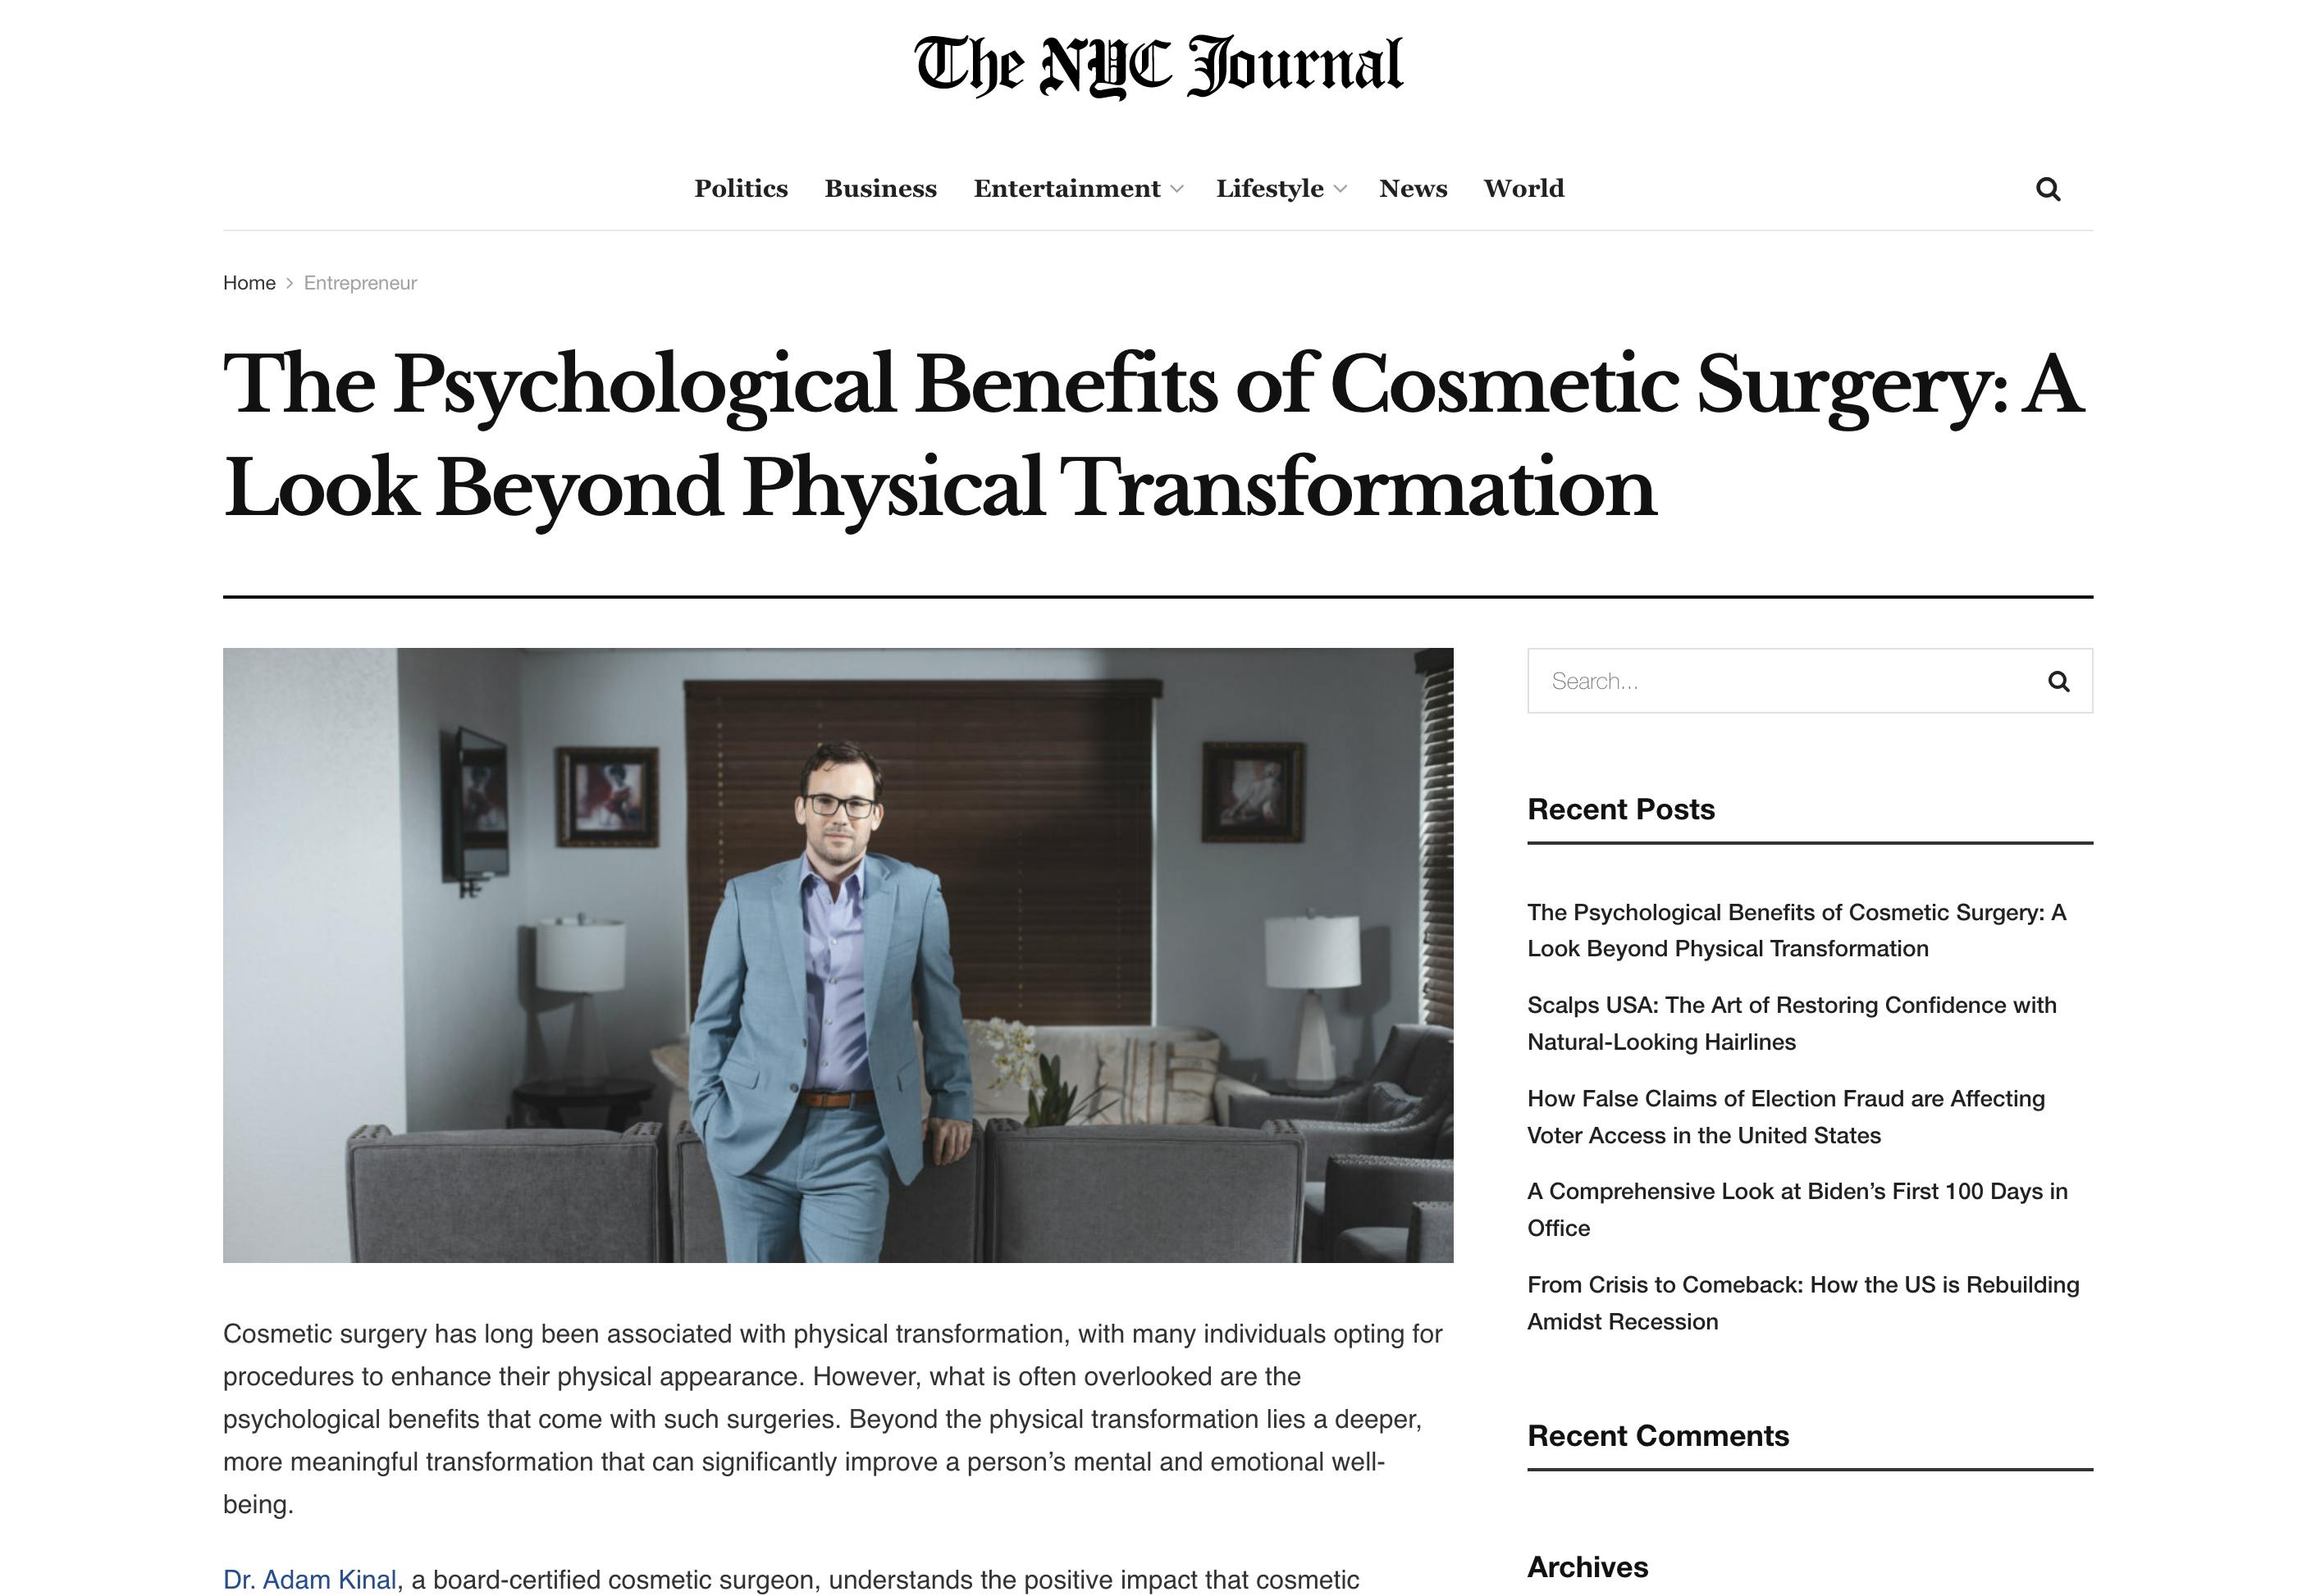 The Psychological Benefits of Cosmetic Surgery: A Look Beyond Physical Transformation